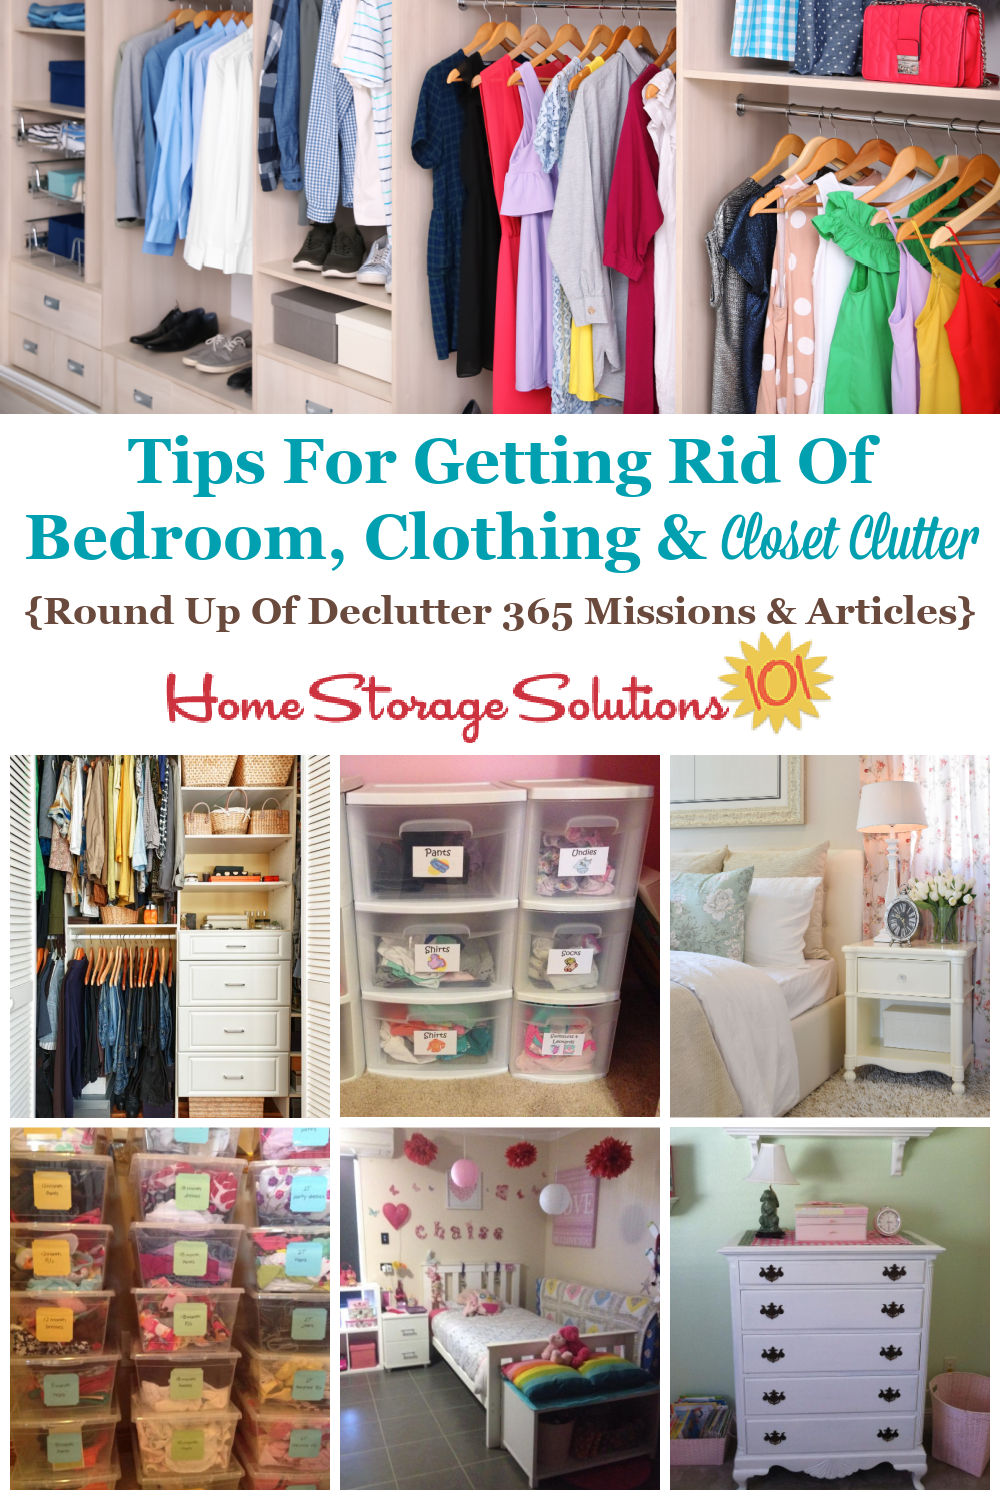 Here is a checklist of bedroom, clothing and closet clutter to consider getting rid of, plus a round up of Declutter 365 missions and articles to help you accomplish these tasks {on Home Storage Solutions 101} #Declutter365 #ClosetClutter #BedroomClutter